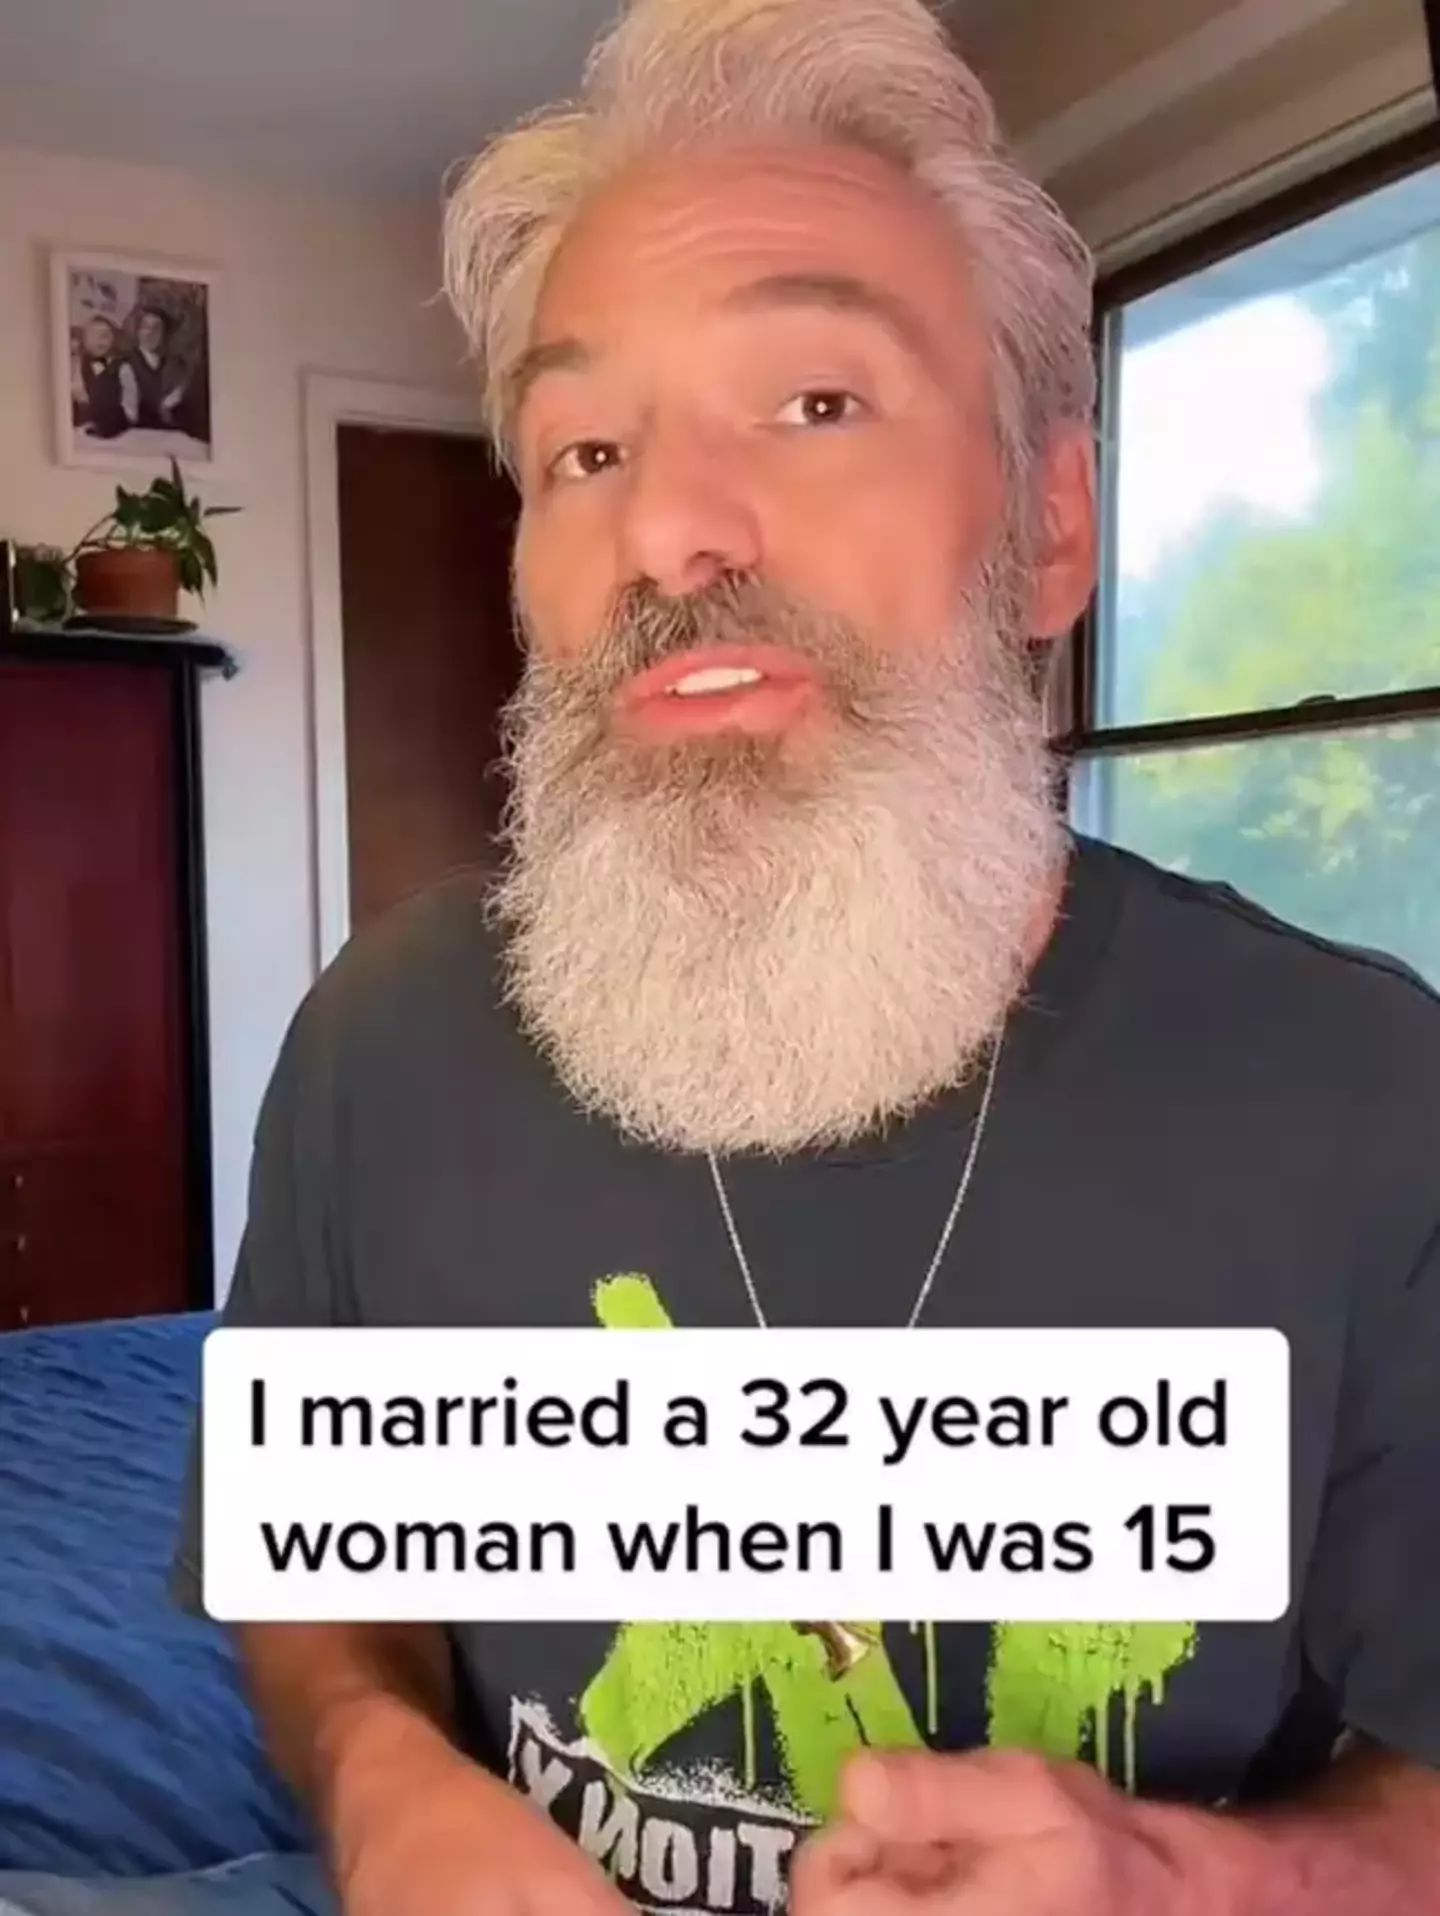 He revealed that things changed after they married.